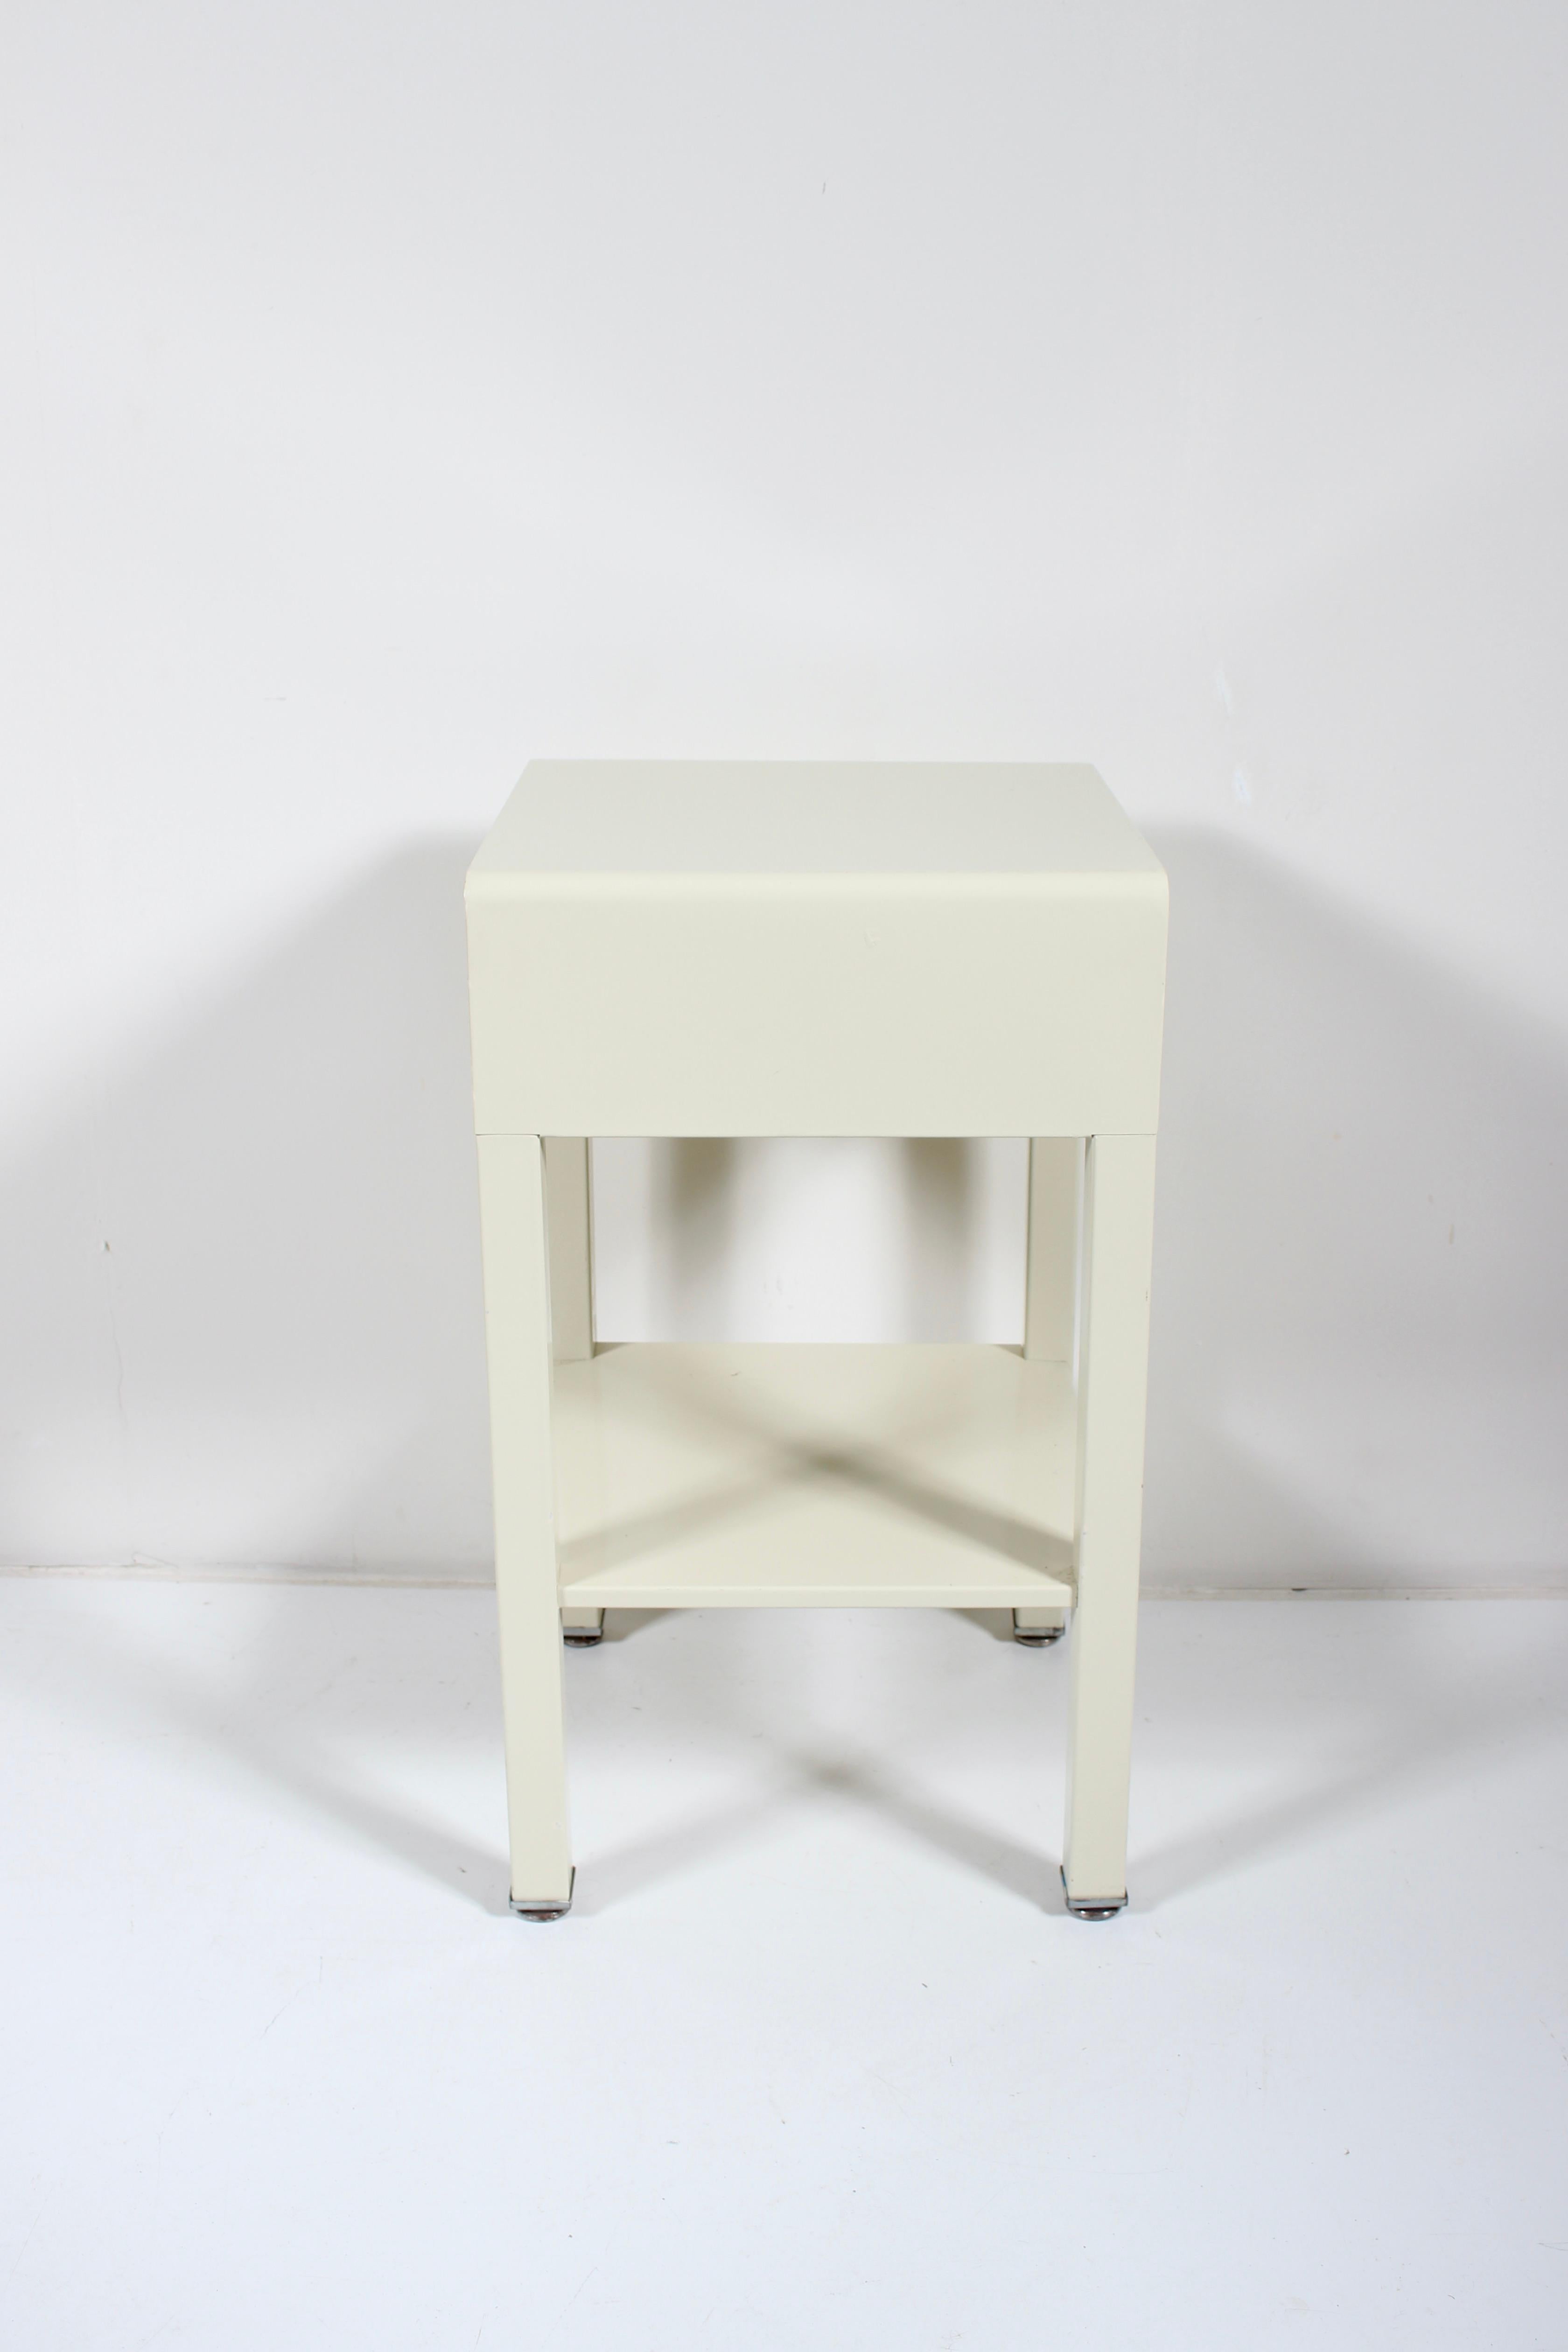 Norman Bel Geddes for Simmons Off White Enameled Steel Night Stand, 1930's In Good Condition For Sale In Bainbridge, NY